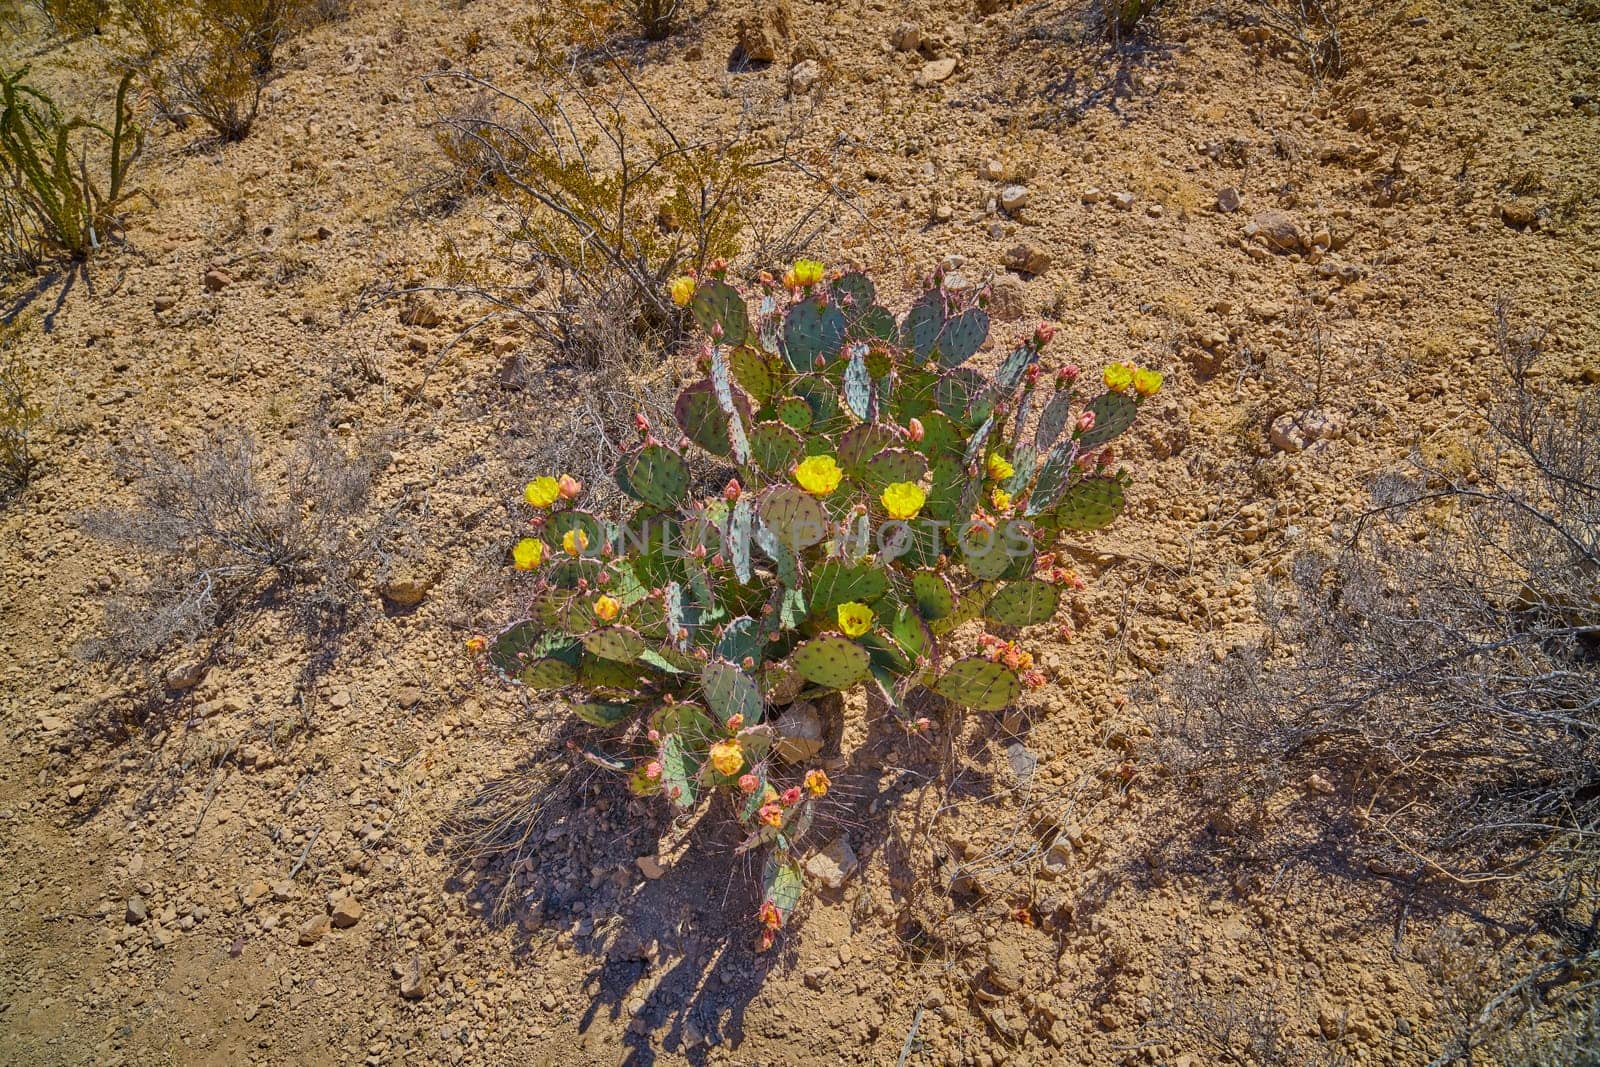 Yellow blooms on Eastern prickly pear cactus at Big Bend National Park, Texas.